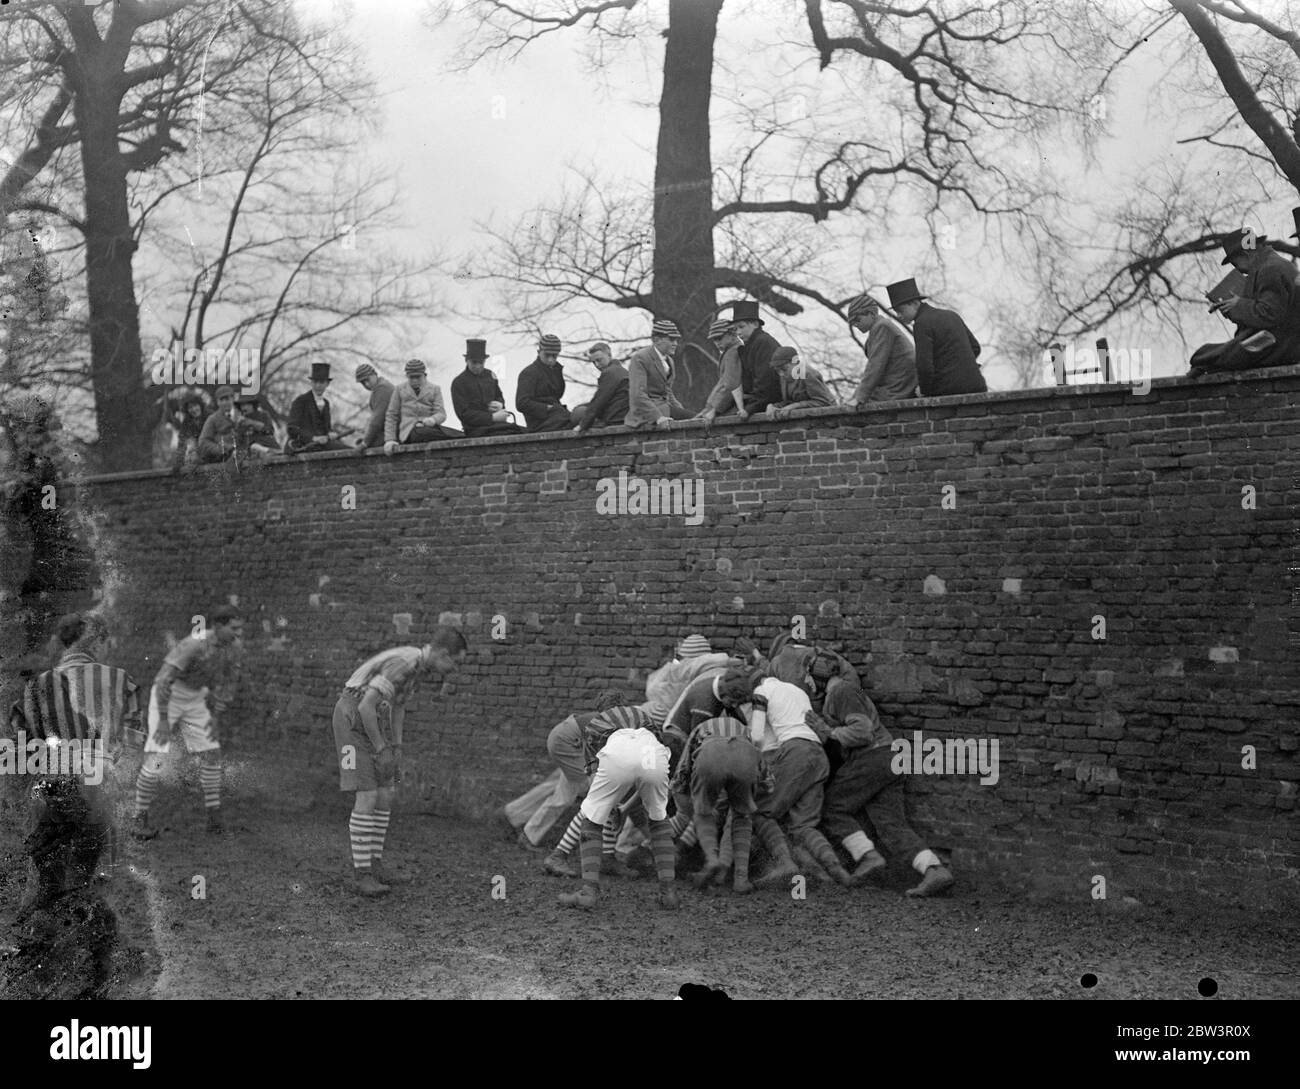 Collegues and oppidans play Eton game in mud . The annual Wall Game , the traditional struggle between Collegers and Oppdiana took place at Eton College as part of the St Andrew ' s Day celebrations . Each side worked hard to score the first goal for 26 years , but rain made play extremely difficult . Photo shows , the wall game in progress . 30 November 1935 Stock Photo